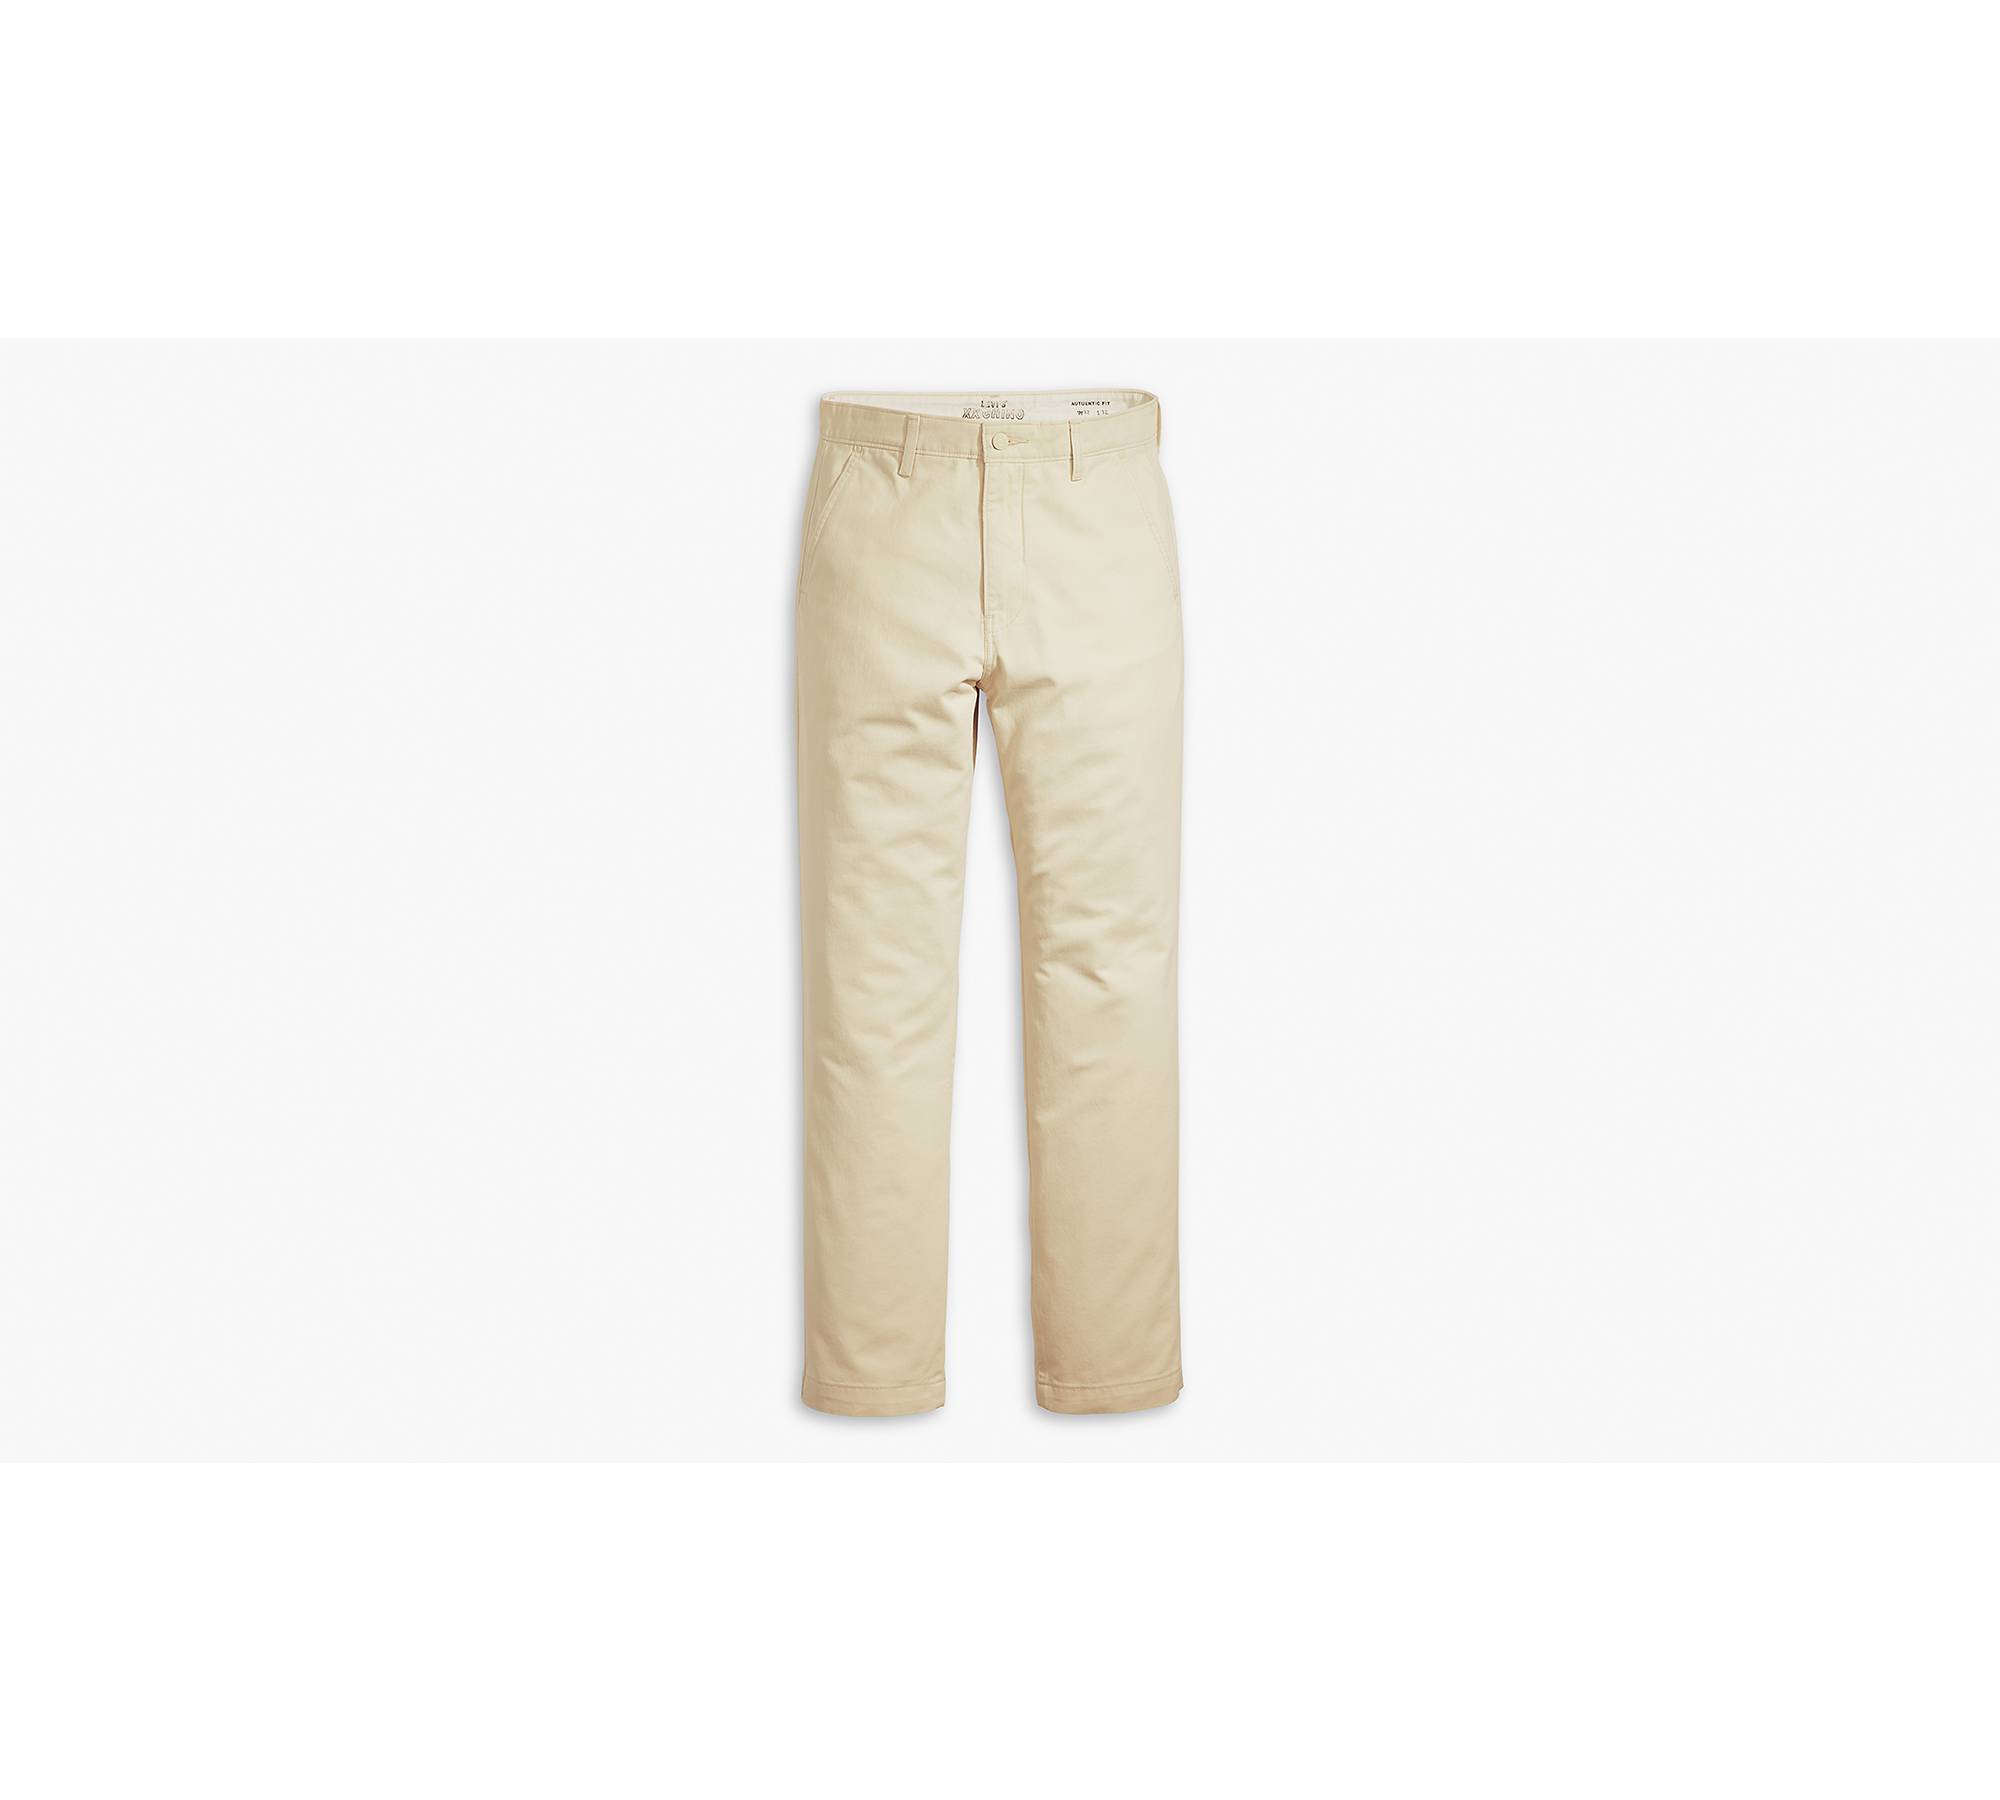 Xx Chino Authentic Straight Pants - Neutral | Levi's® GB